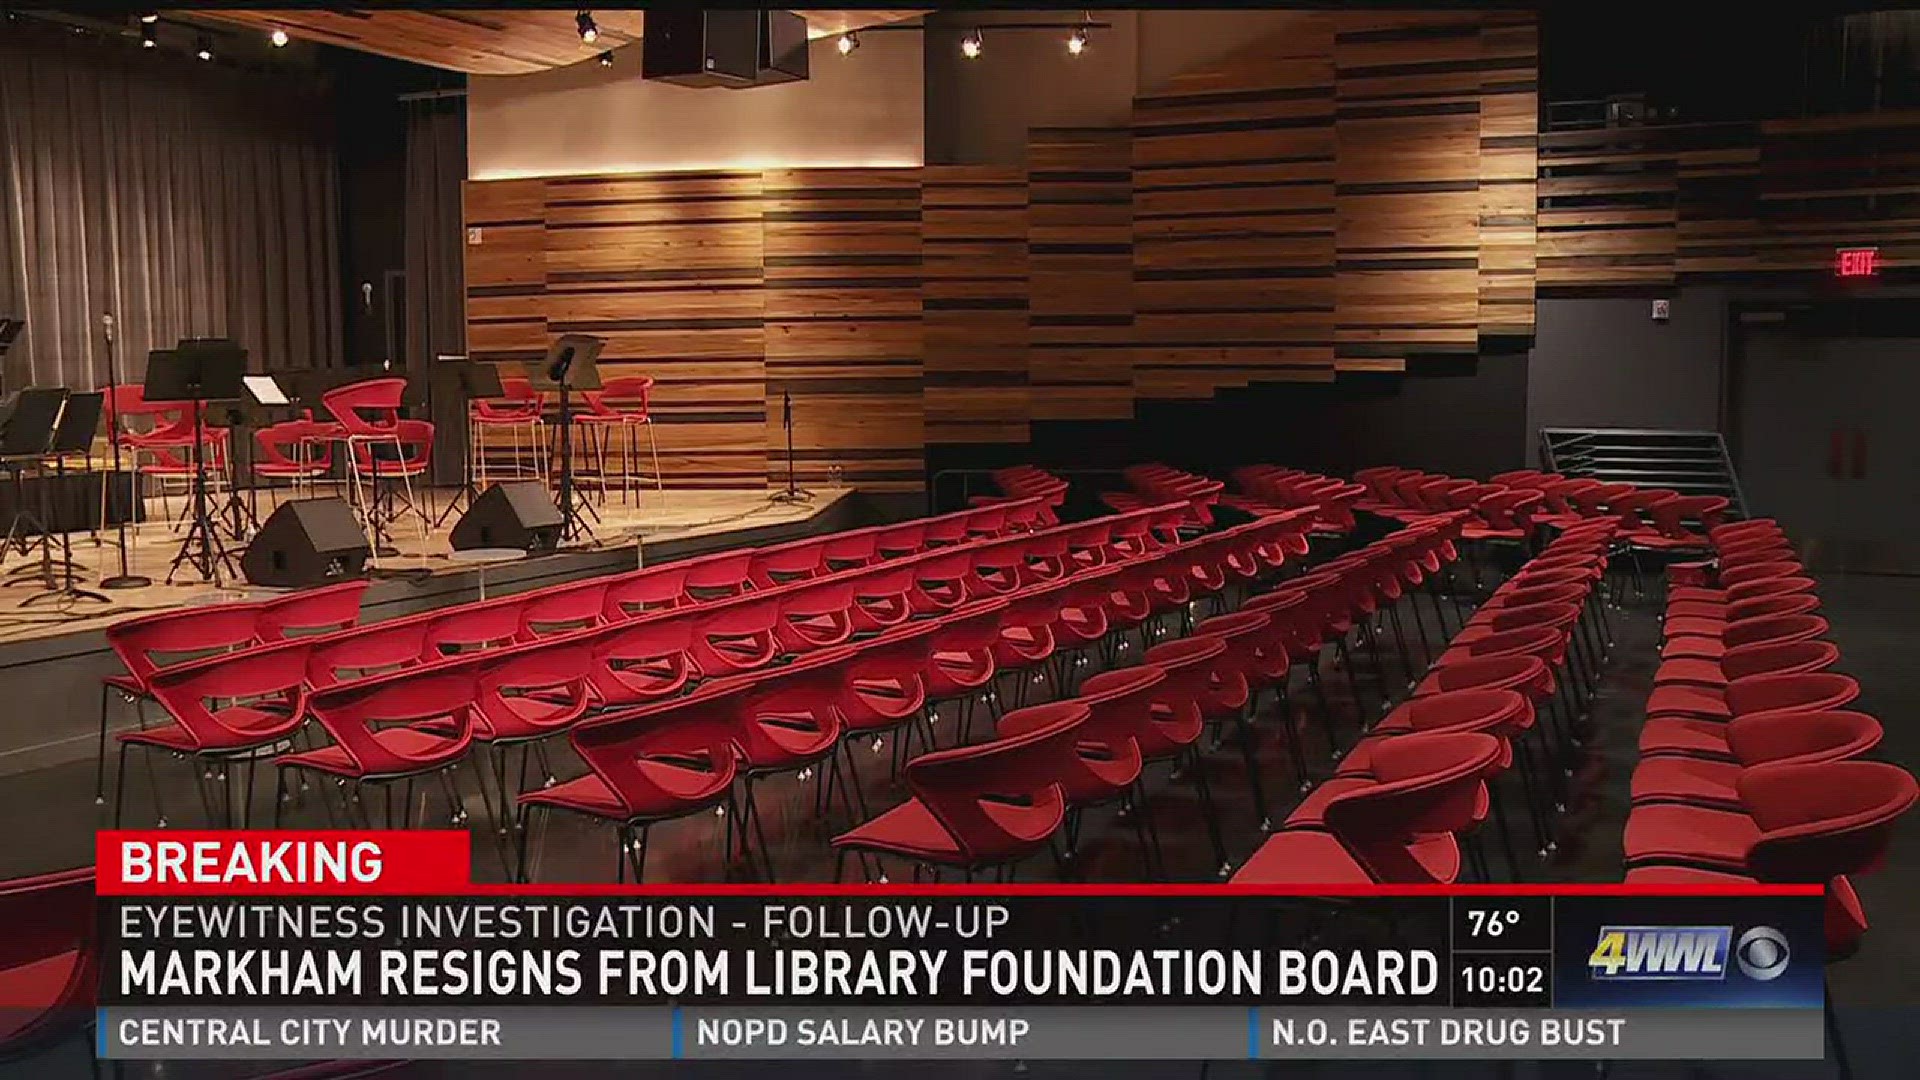 Mayor calls for changes to library foundation